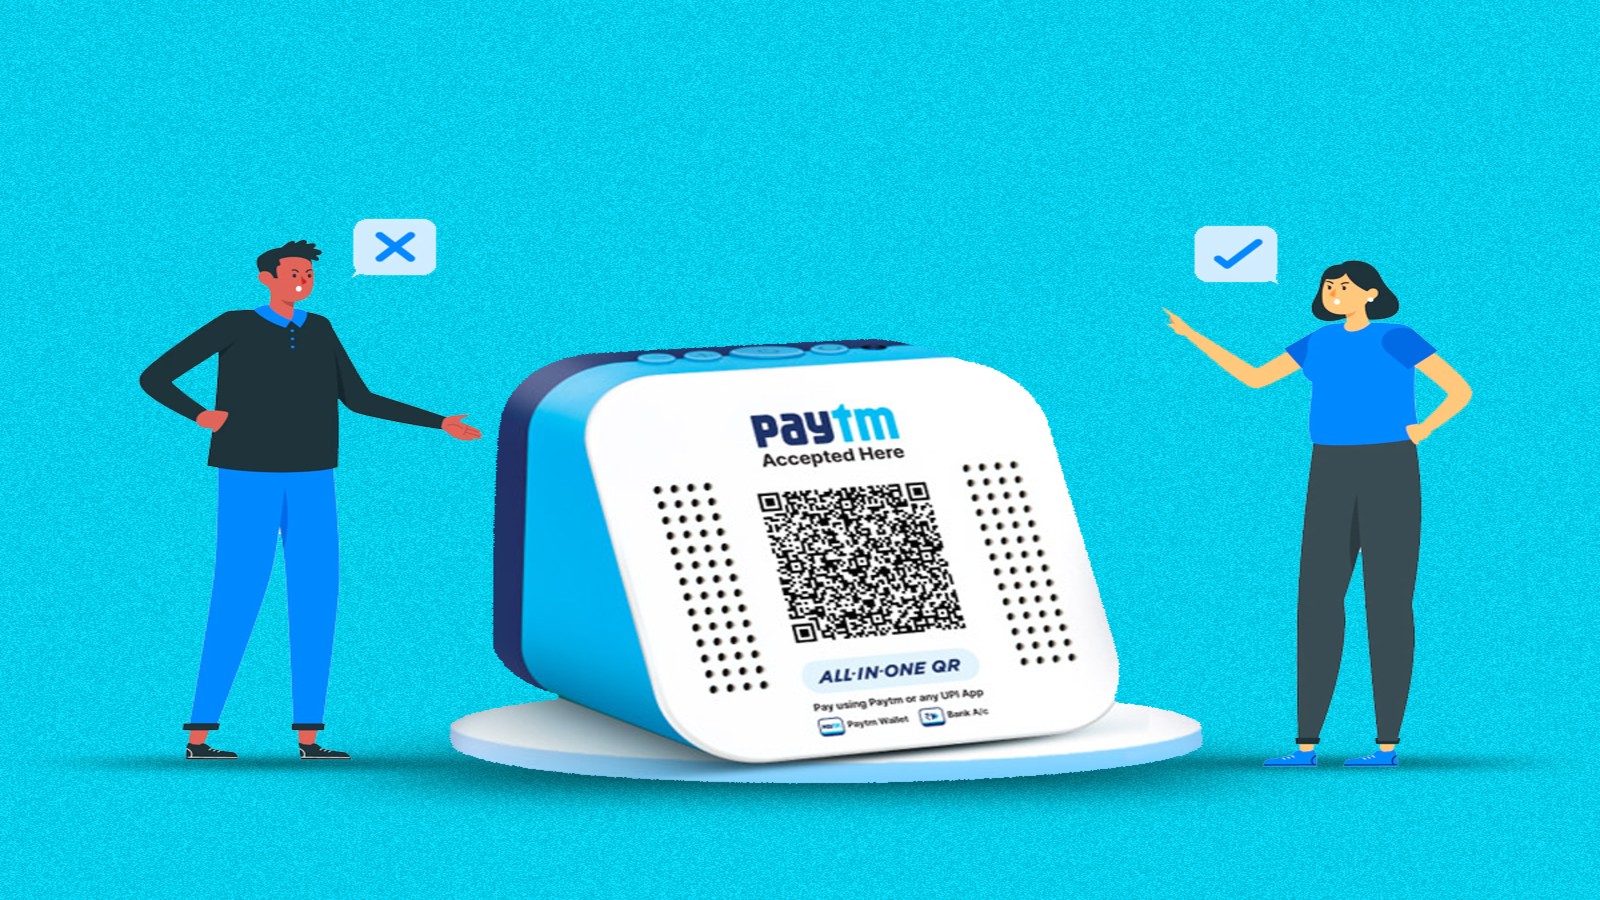 Paytm Payments Bank's 